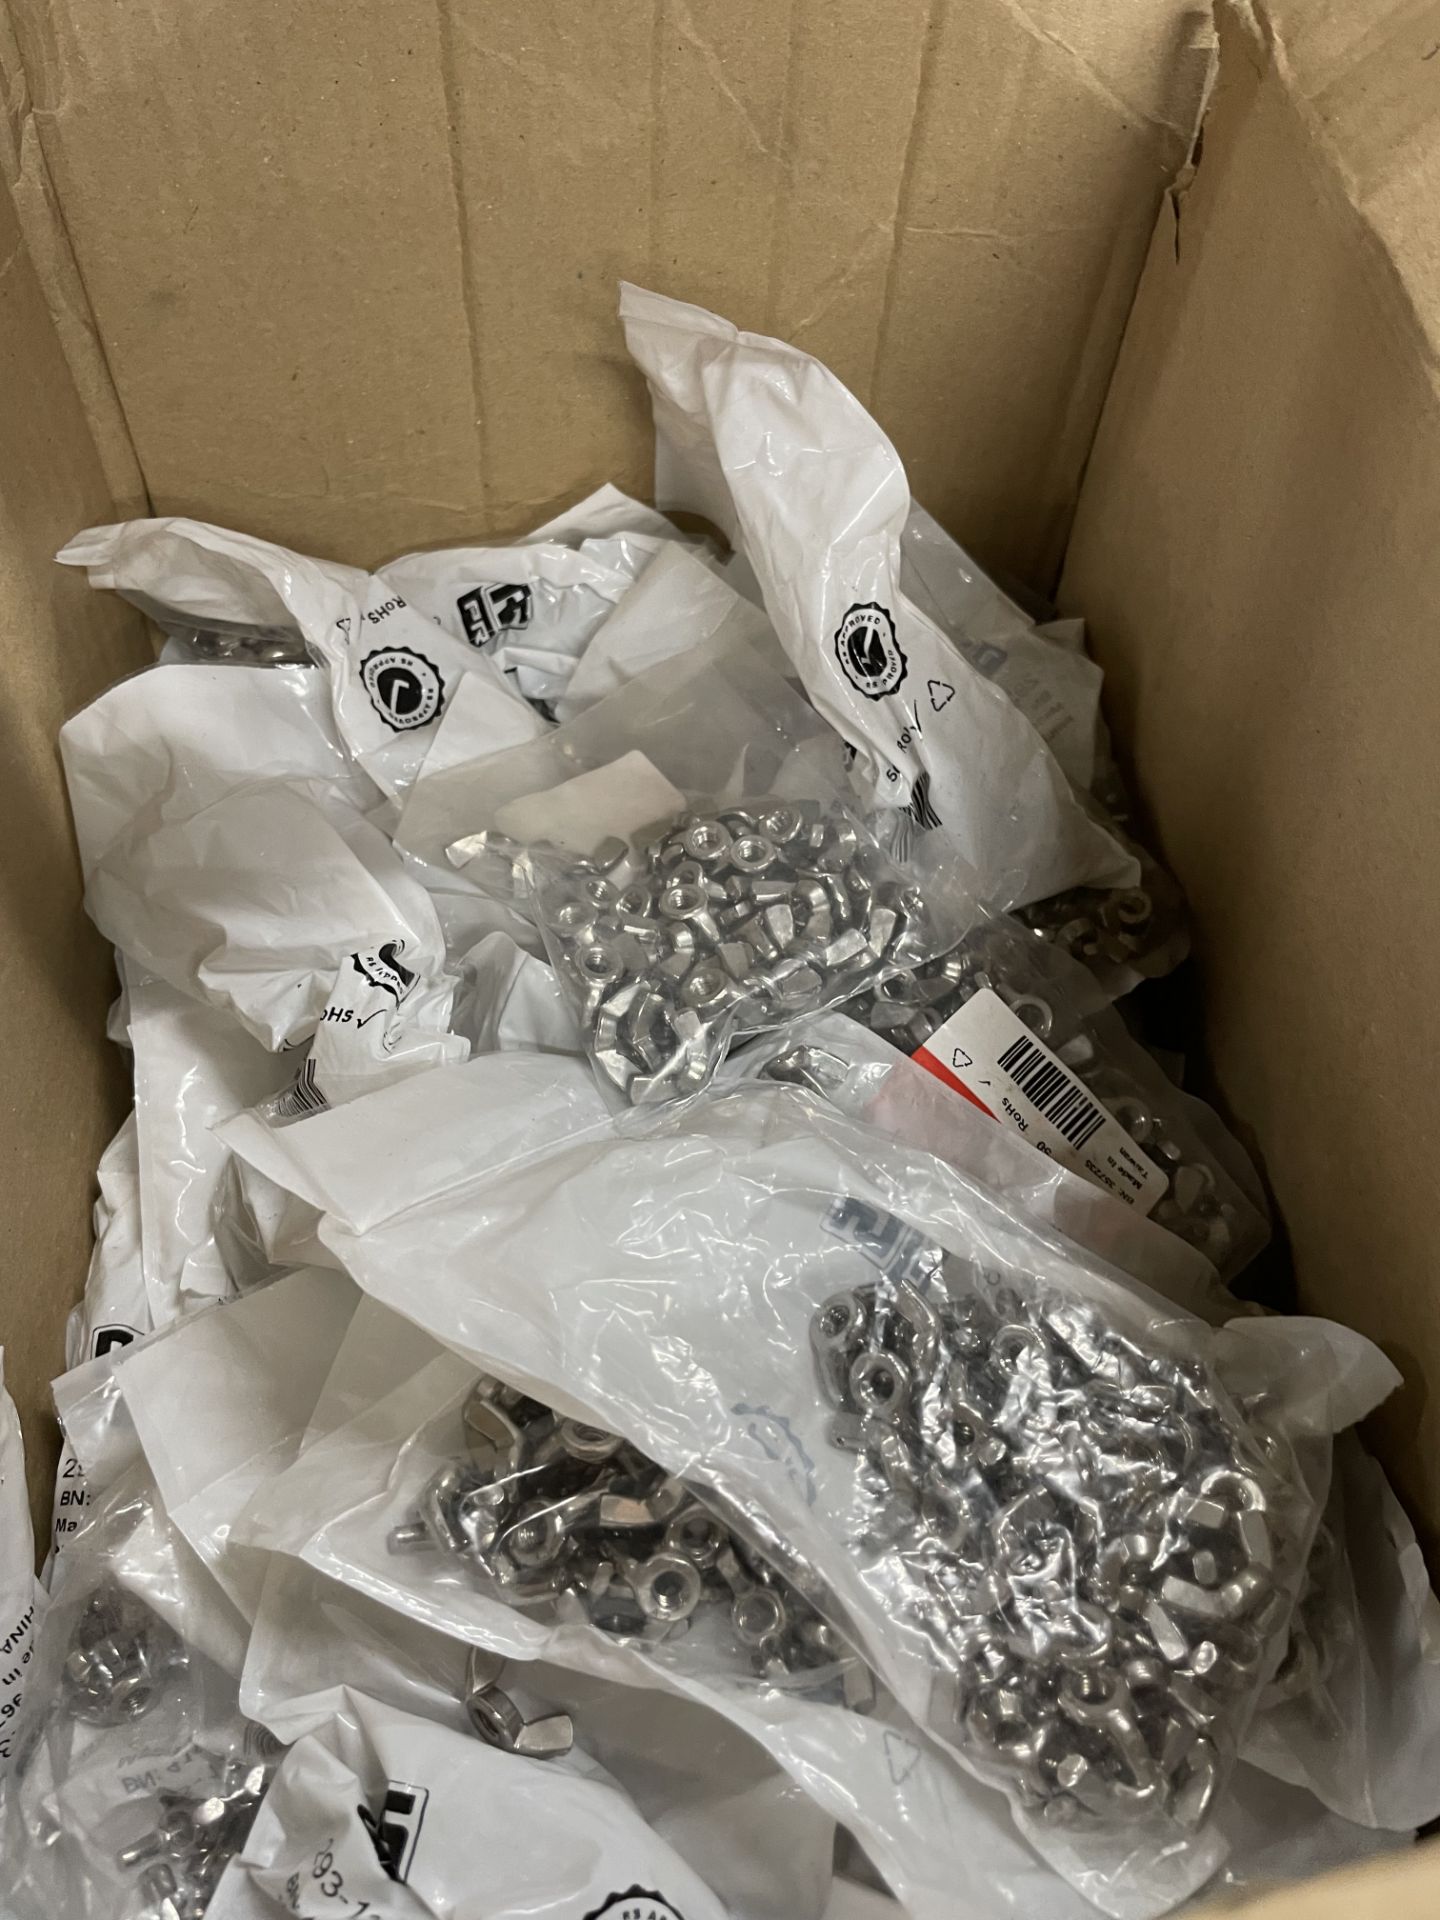 Approximately 50 x Boxes of 50 24mm Plain Stainless Steel Wingnuts - Image 5 of 5